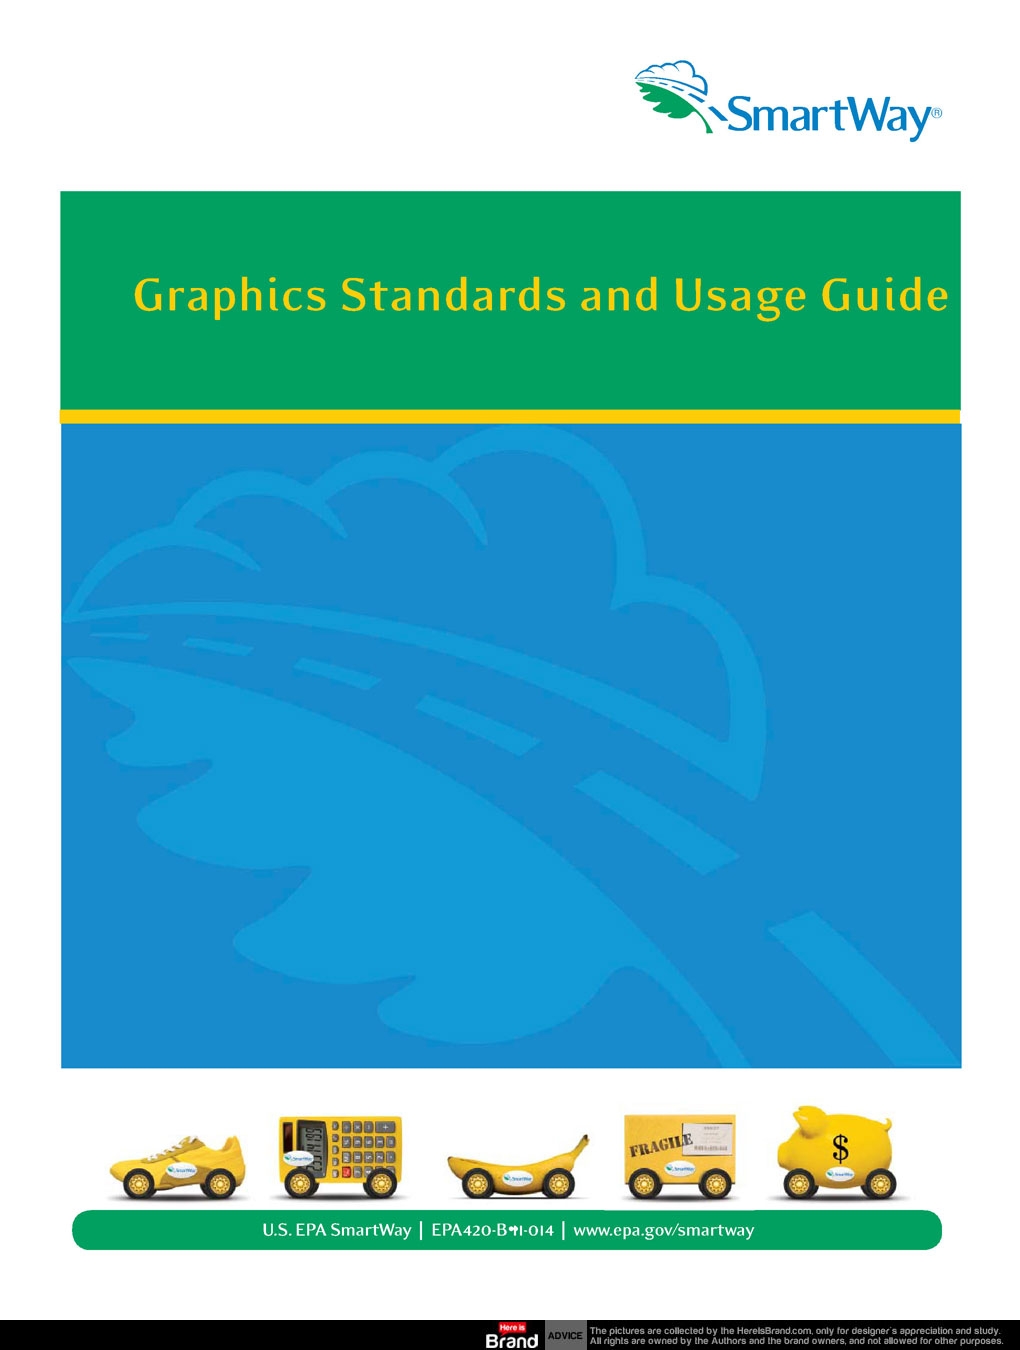 Smart Way graphics standards and usage guide